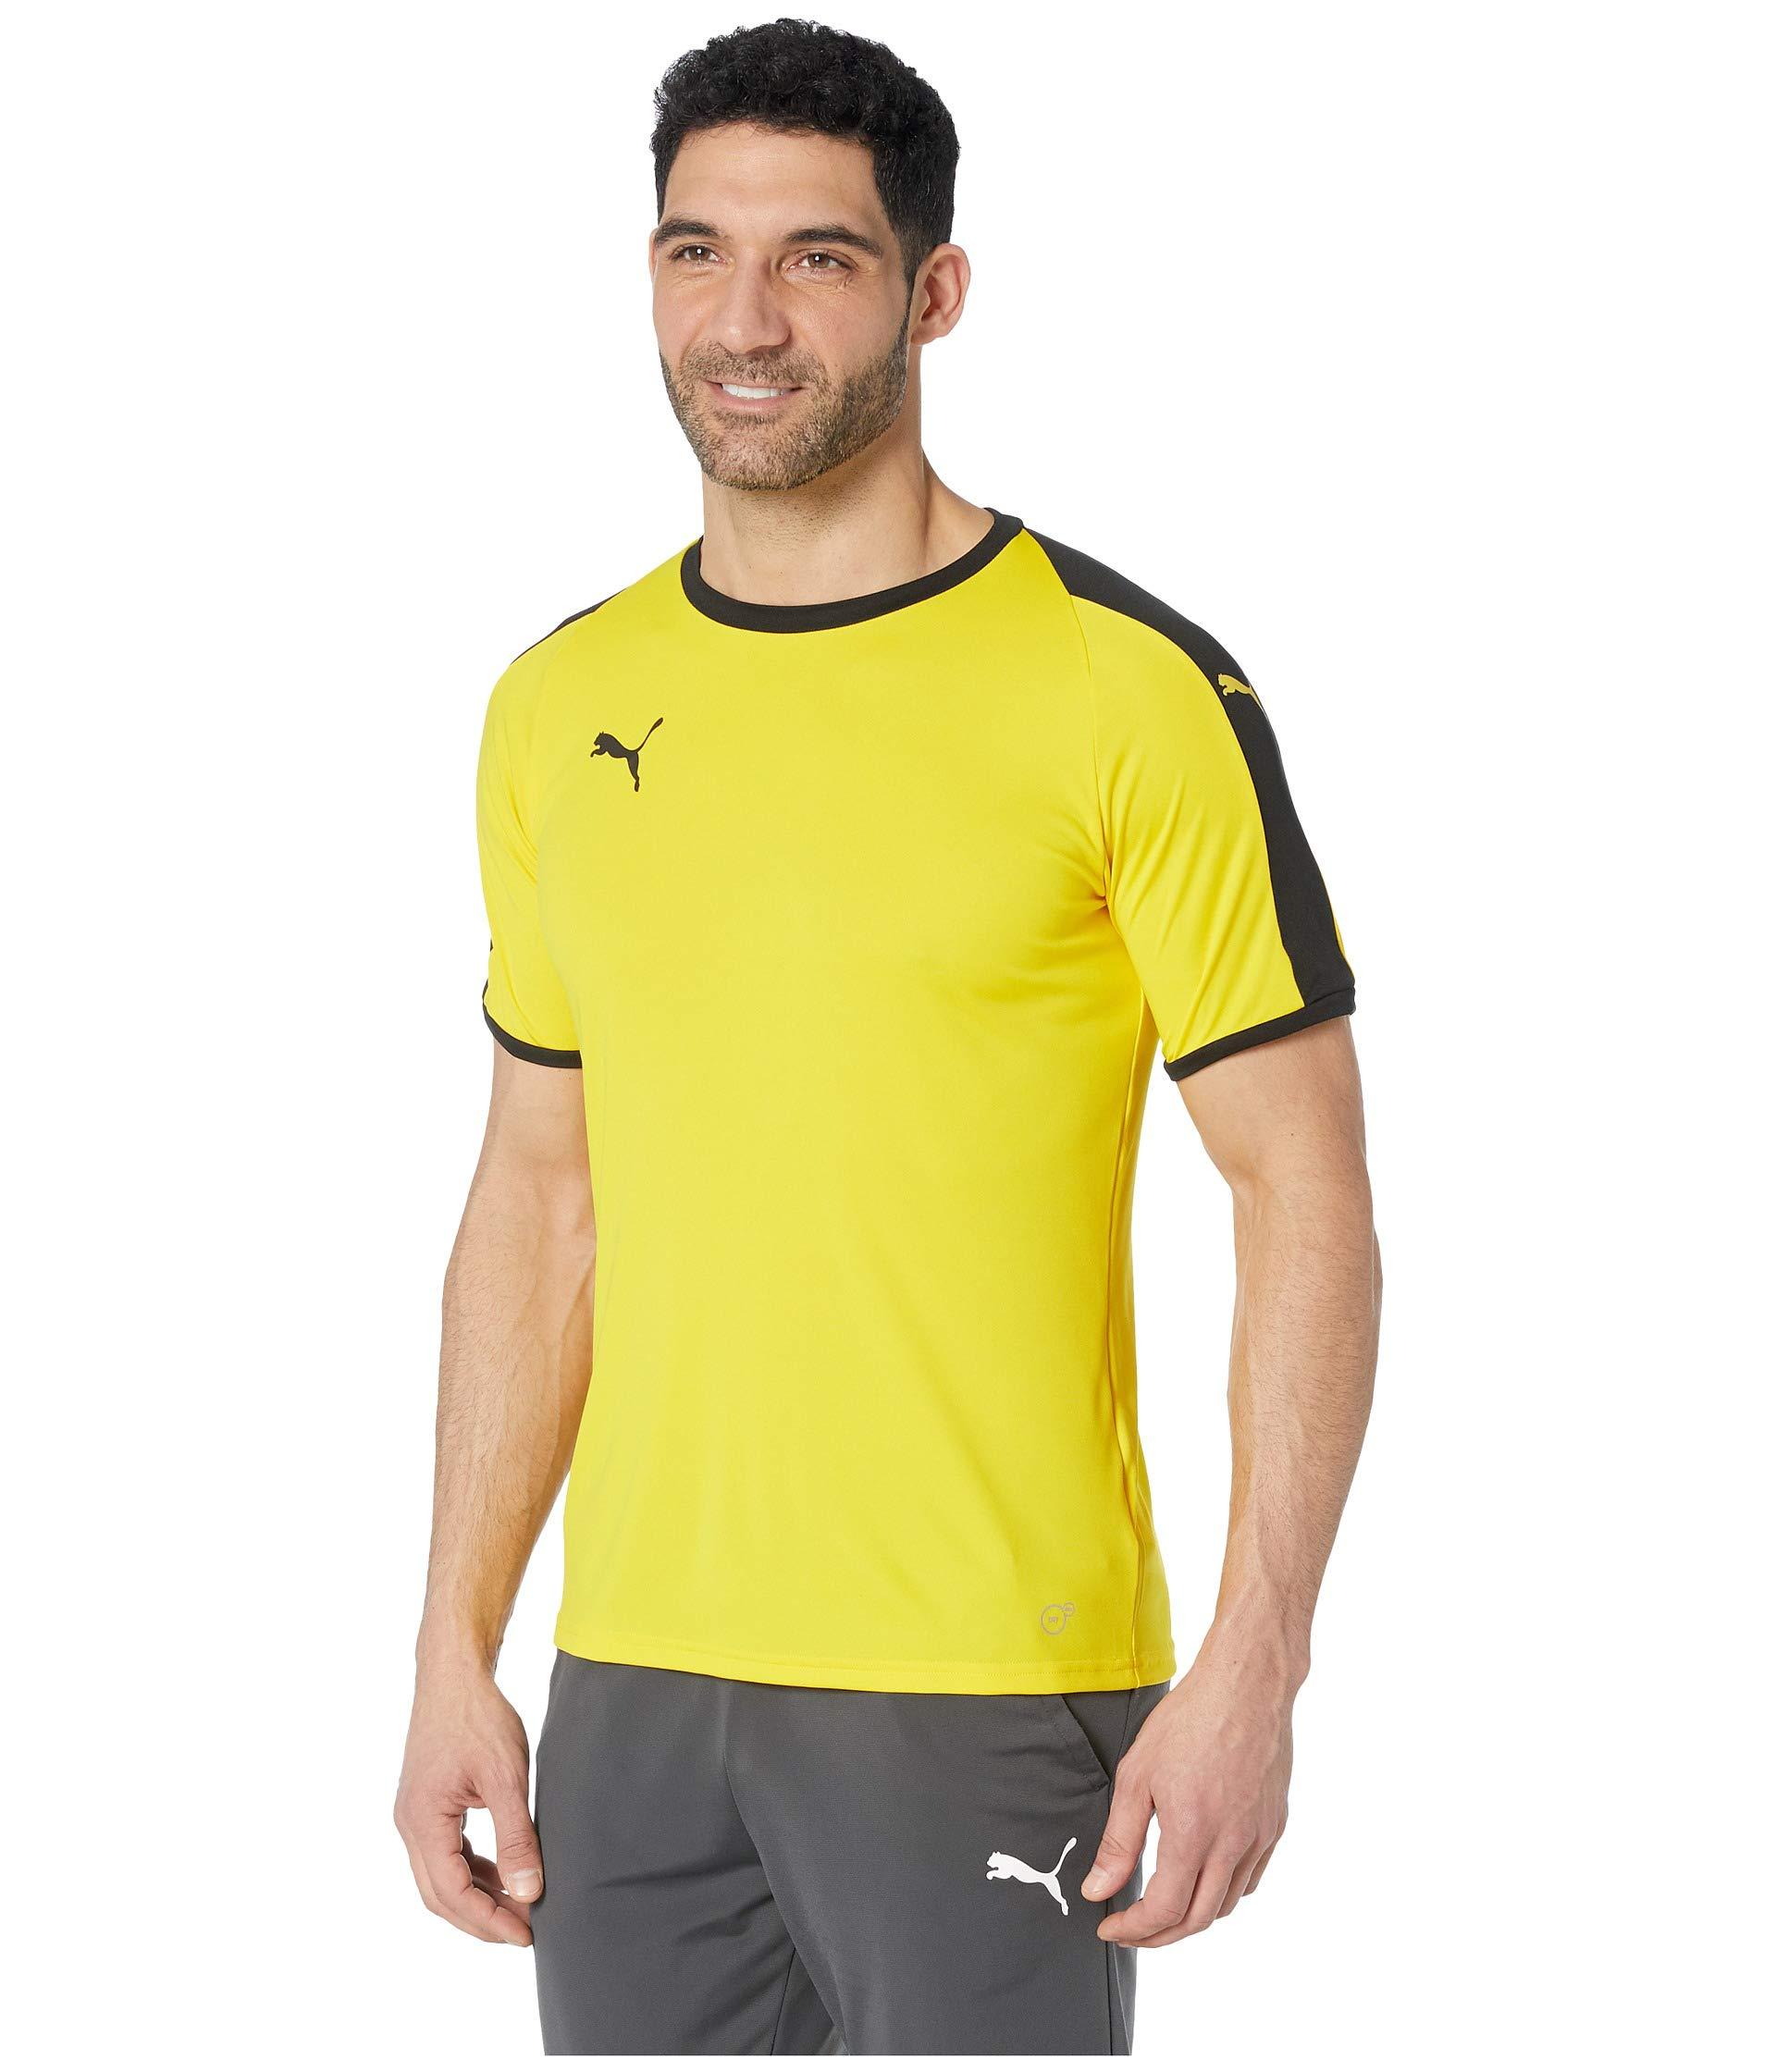 PUMA Synthetic Liga Jersey in Yellow for Men - Lyst